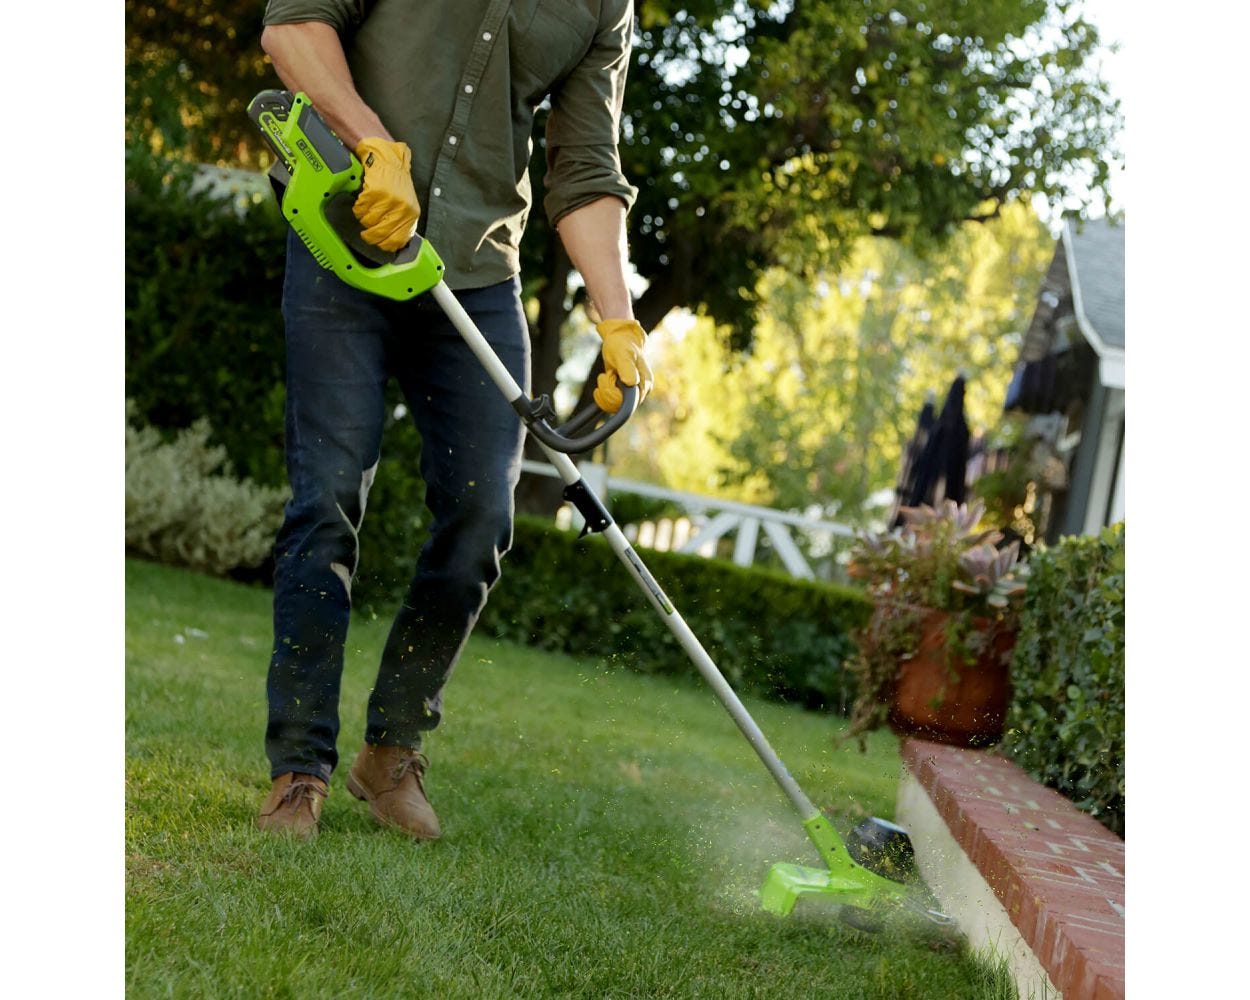  RYOBI 40-Volt Lithium-Ion Cordless Attachment Capable String  Trimmer, 4.0 Ah Battery and Charger Inc : Patio, Lawn & Garden